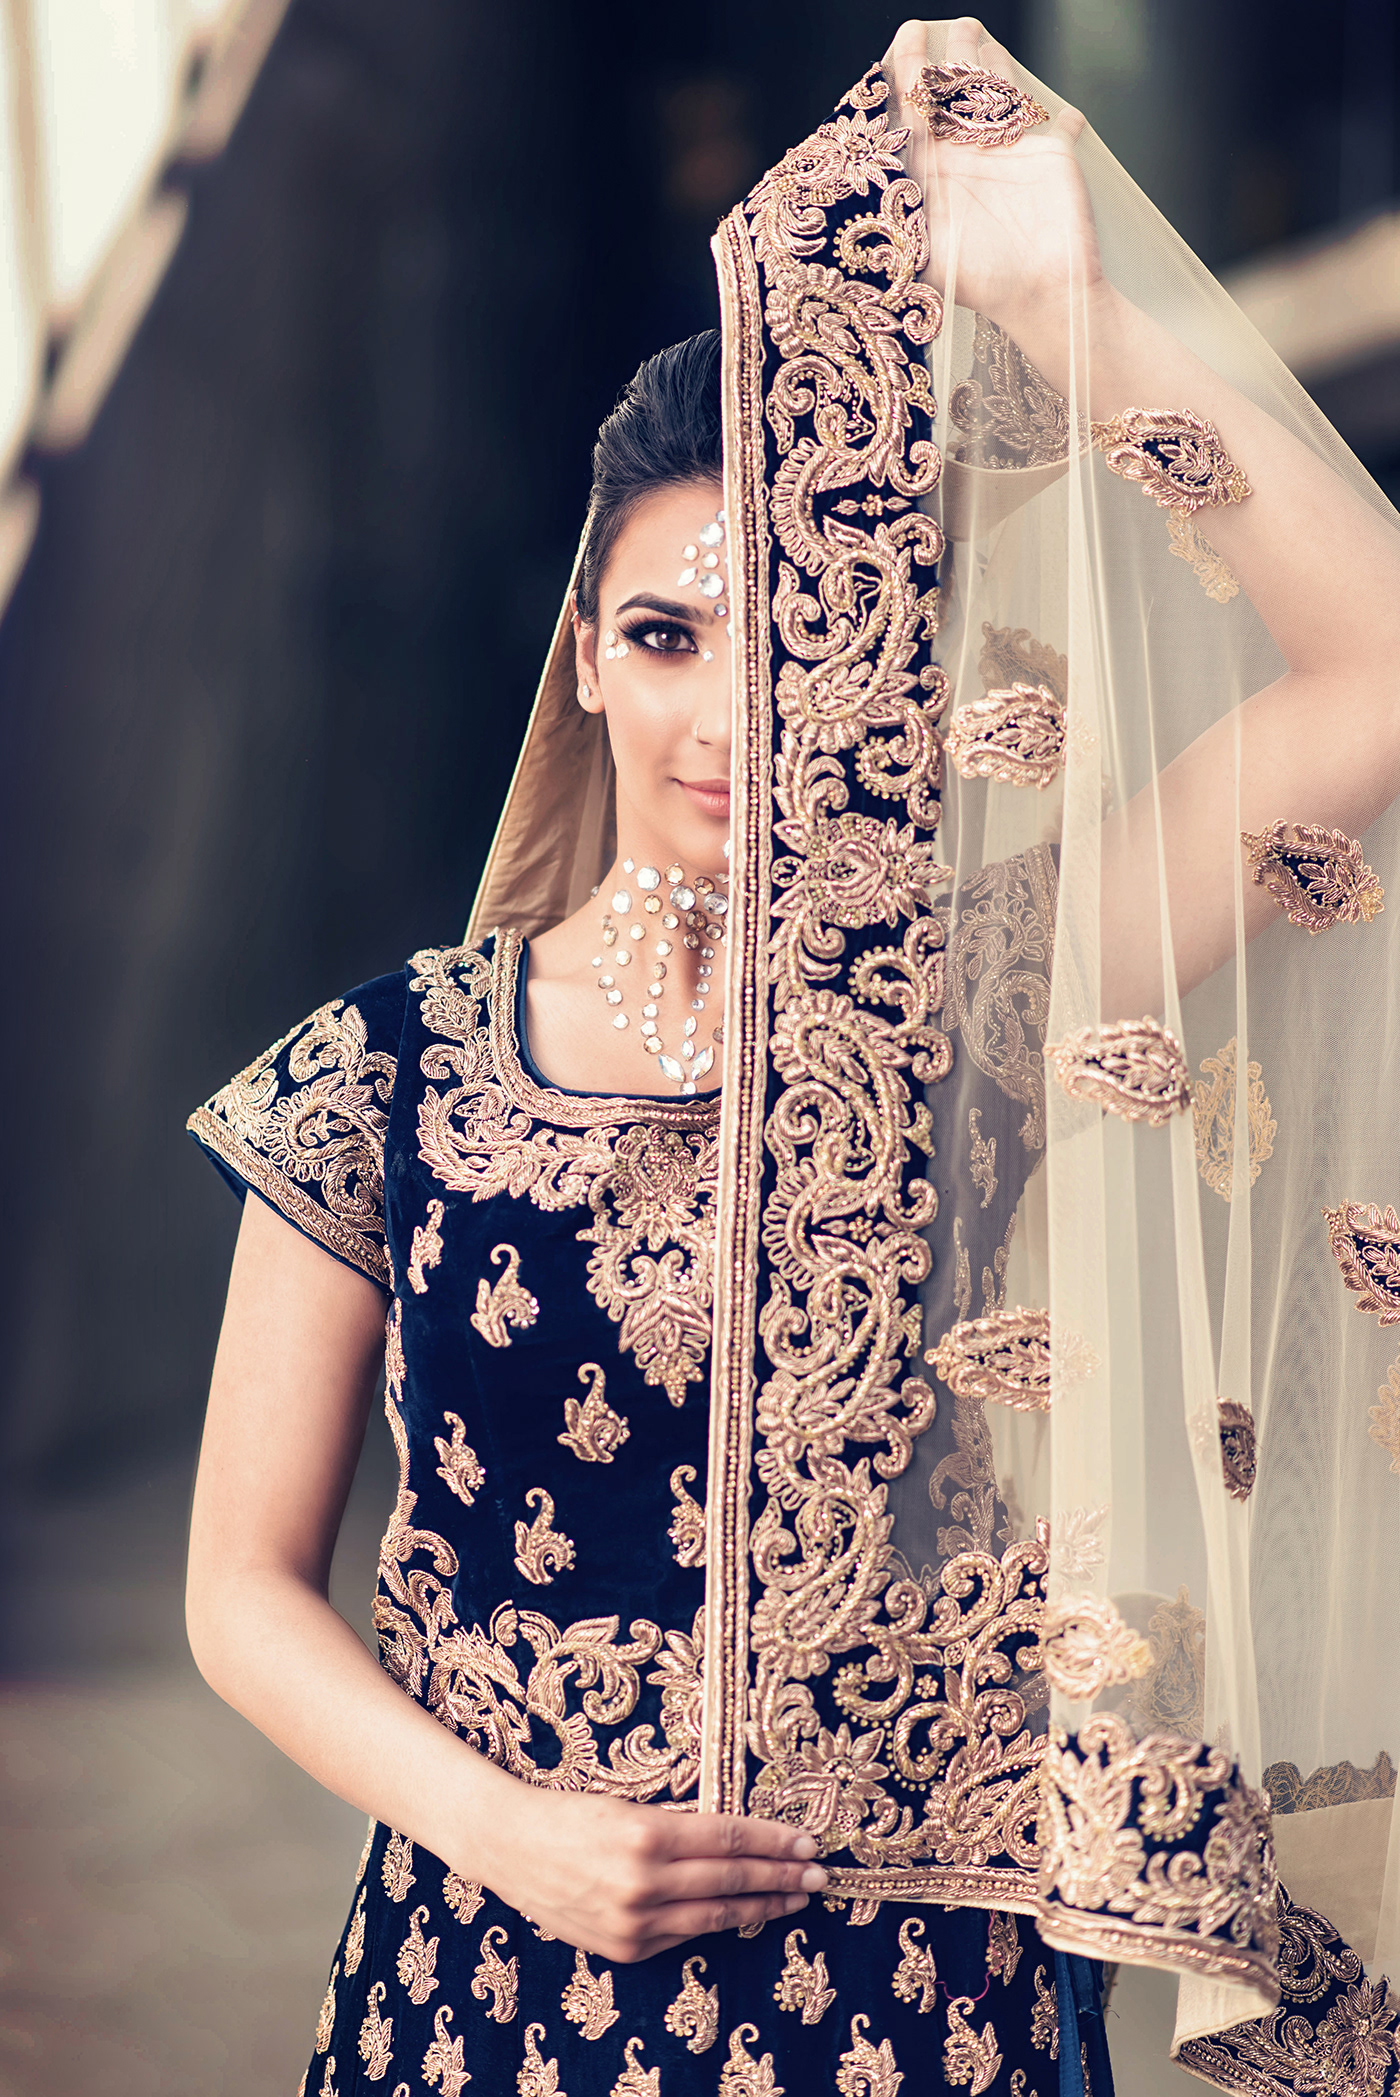 Fashion  indian bride Jewellery moments by suria calgary photographer makeup Bejeweled   portrait